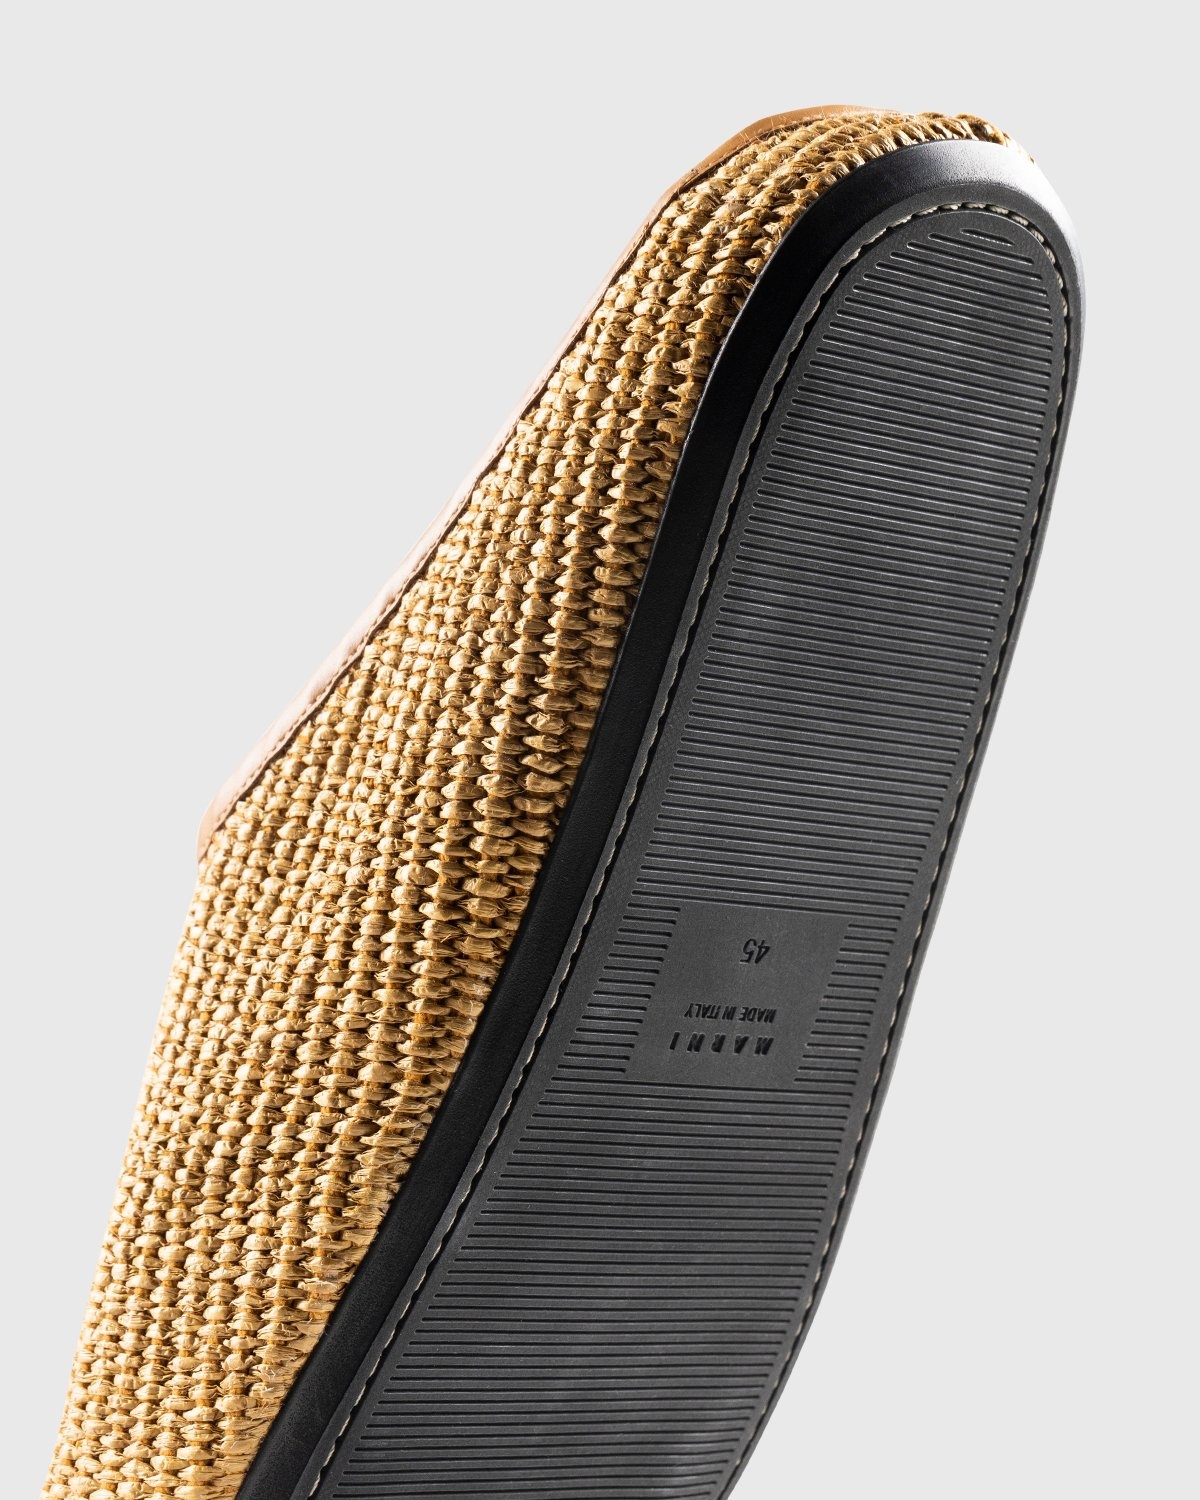 Marni – Woven Raffia and Leather Mules Brown/Black - Shoes - Brown - Image 6